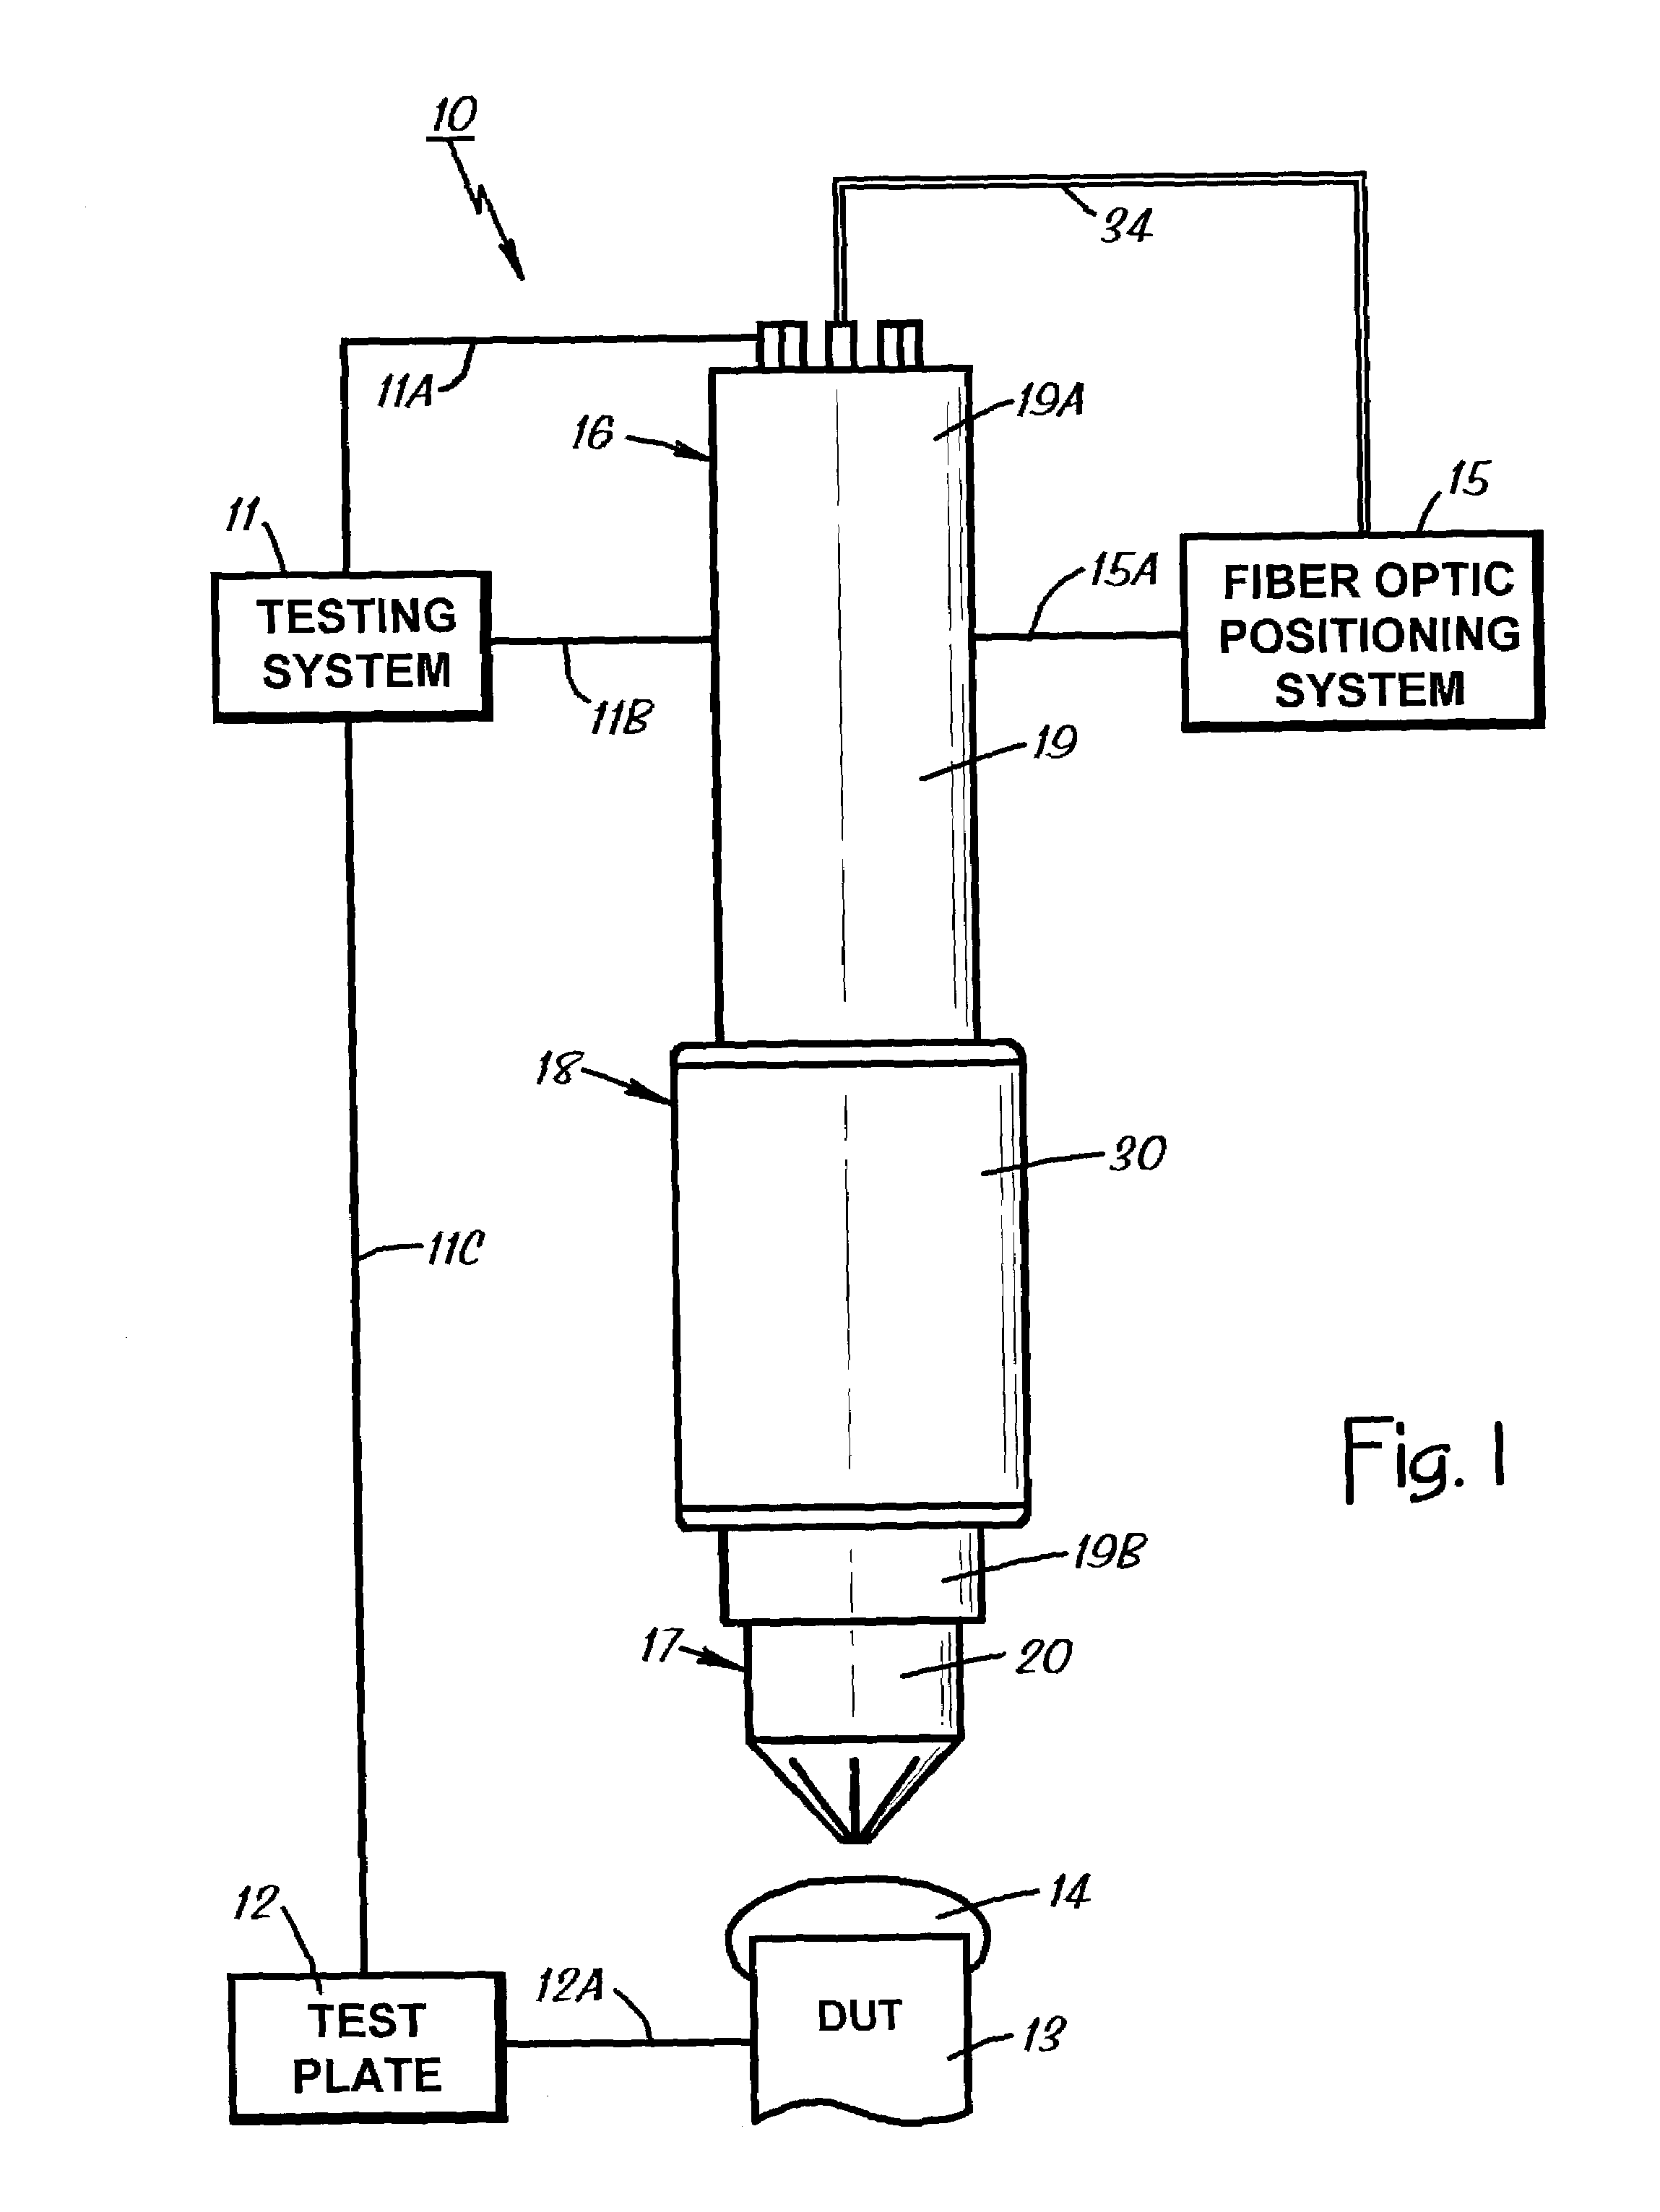 Pogo contactor assembly for testing of and/or other operations on ceramic surface mount devices and other electronic components